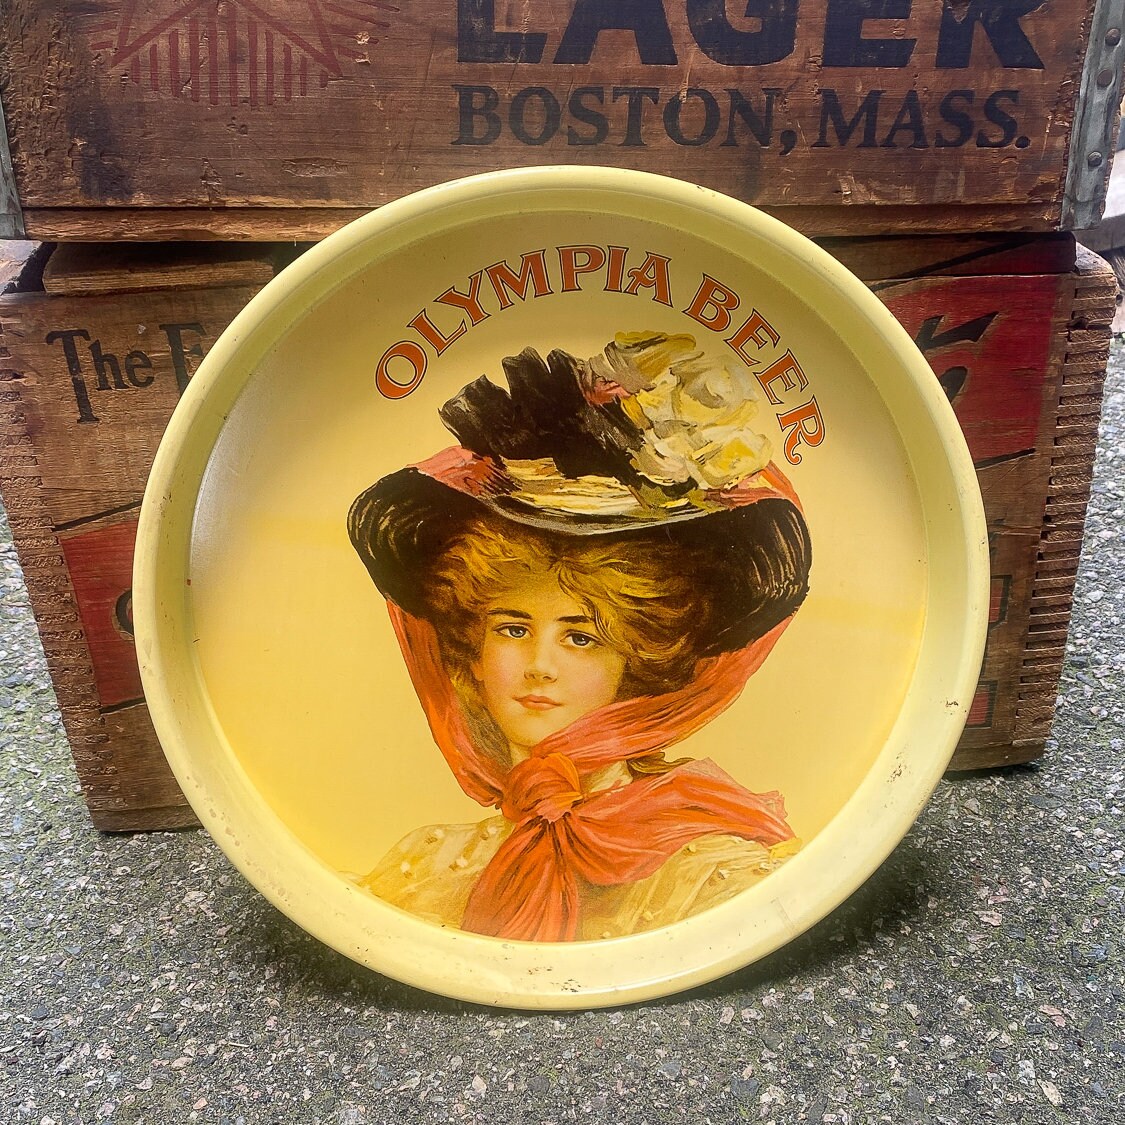 Vintage 70's Red Scarf Olympia Beer, Serving- Advertising Tray -  collectibles - by owner - sale - craigslist